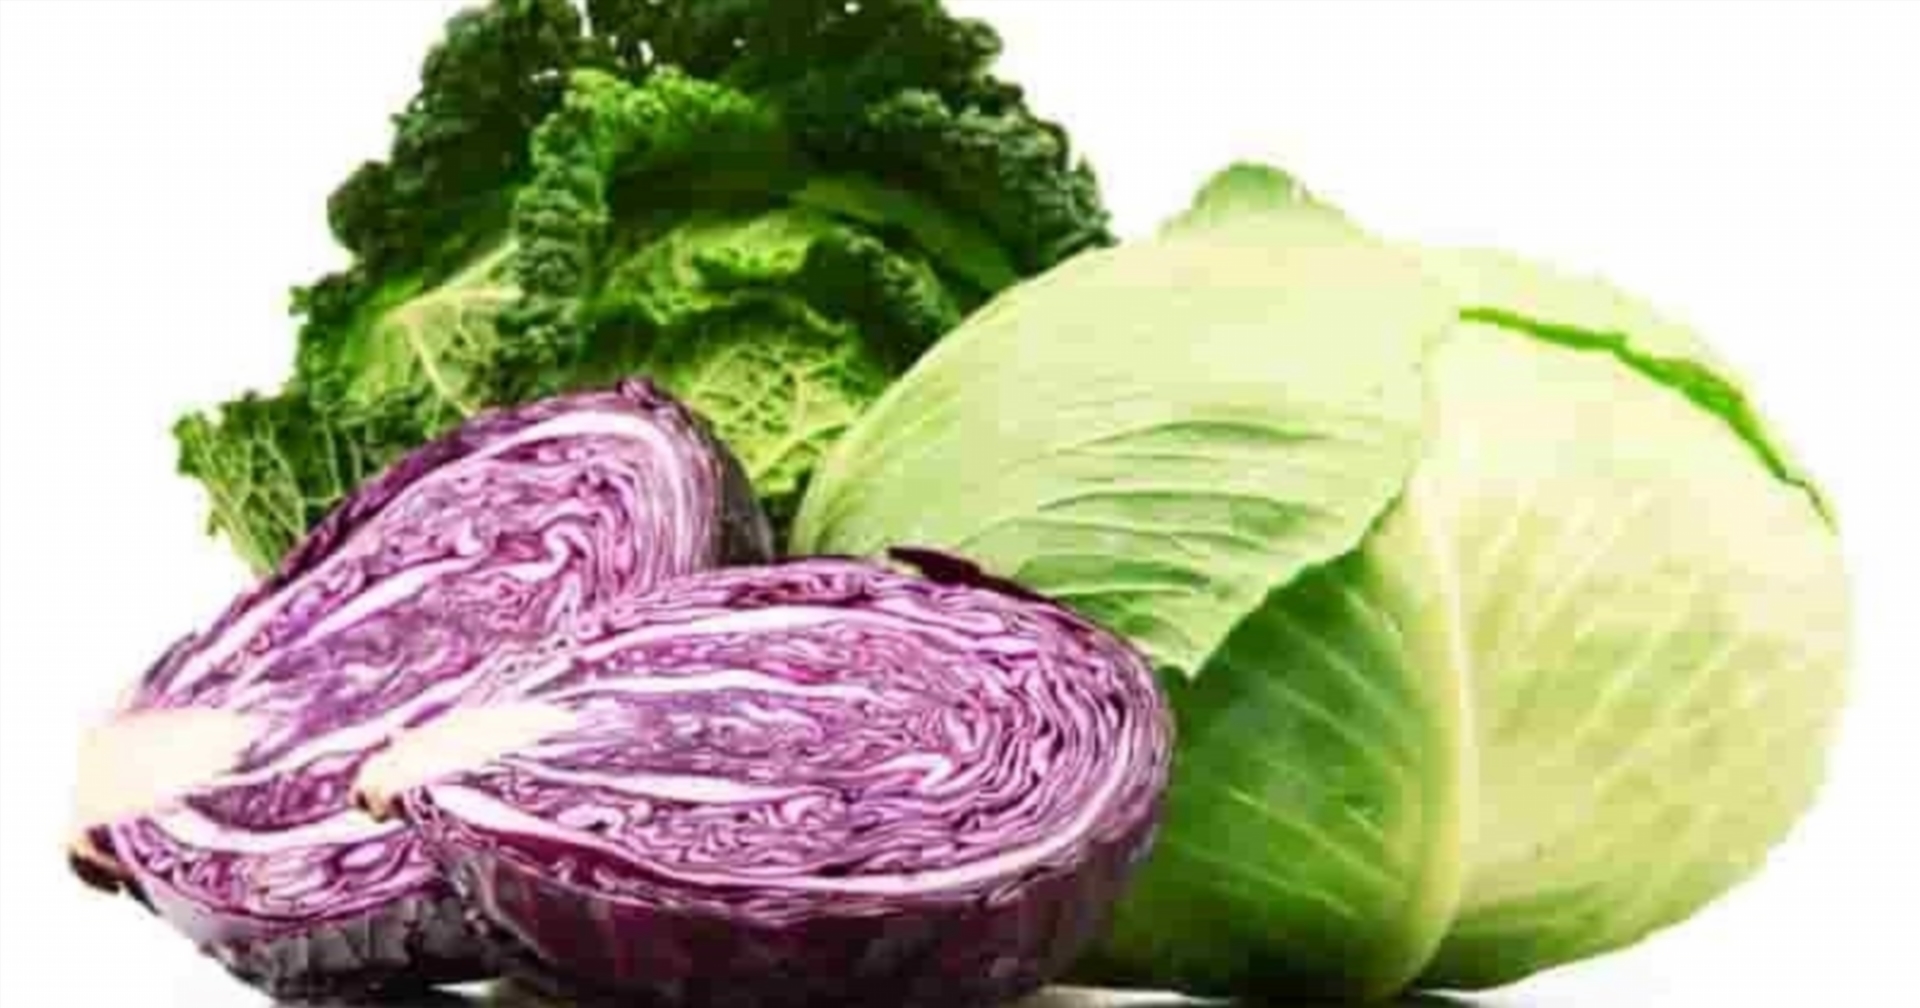 cabbage during pregnancy guide